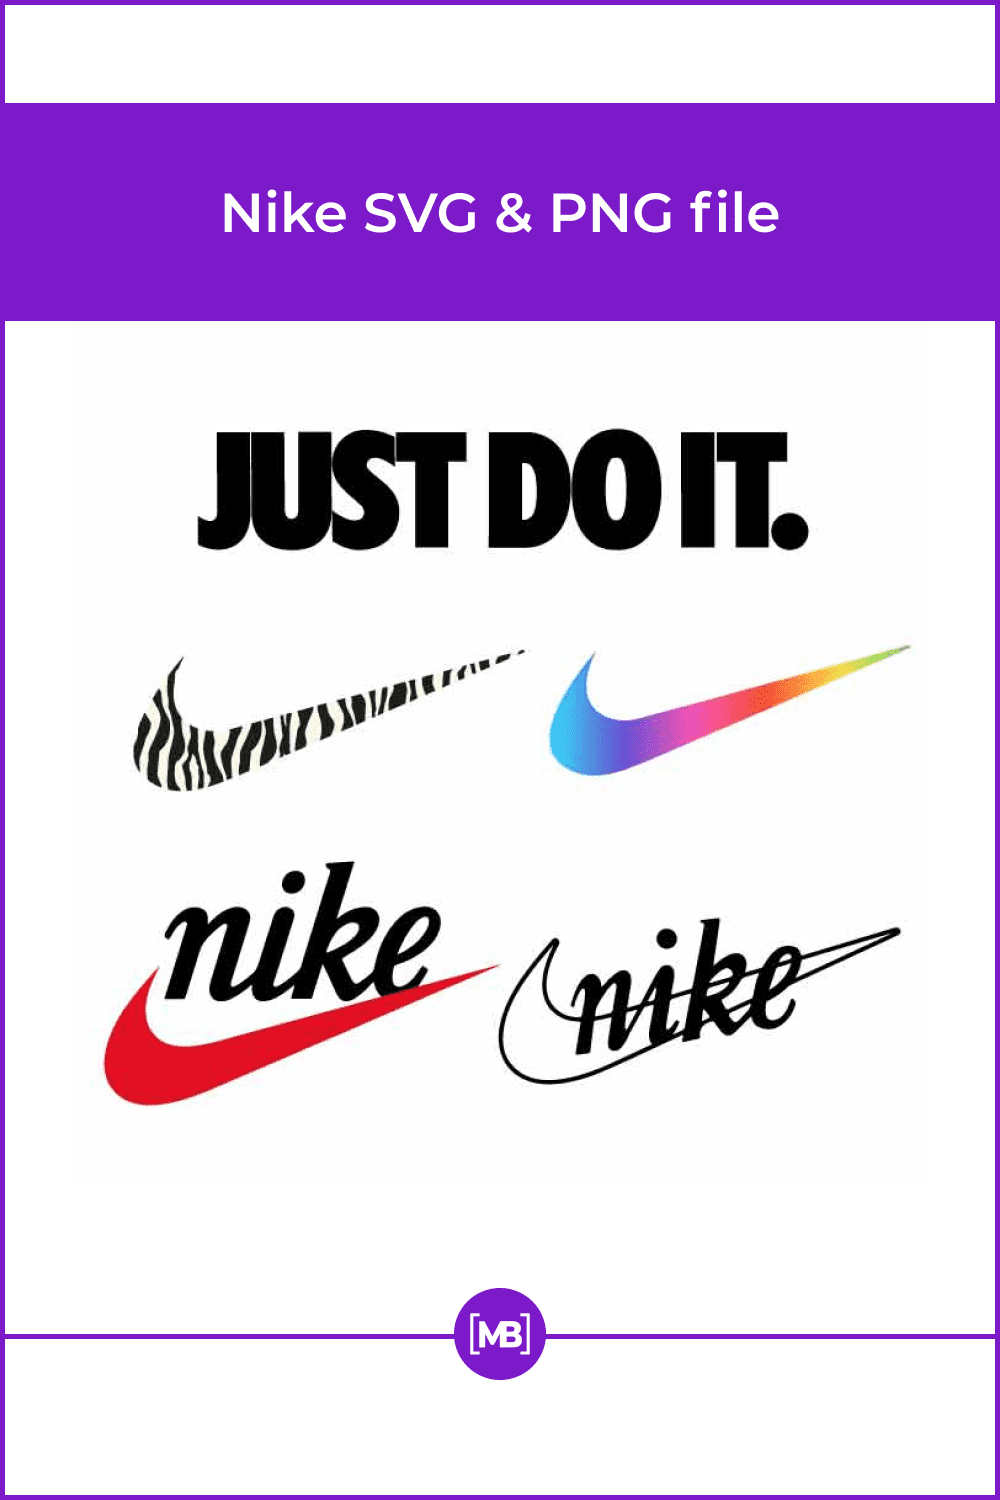 Nike SVG and PNG file.